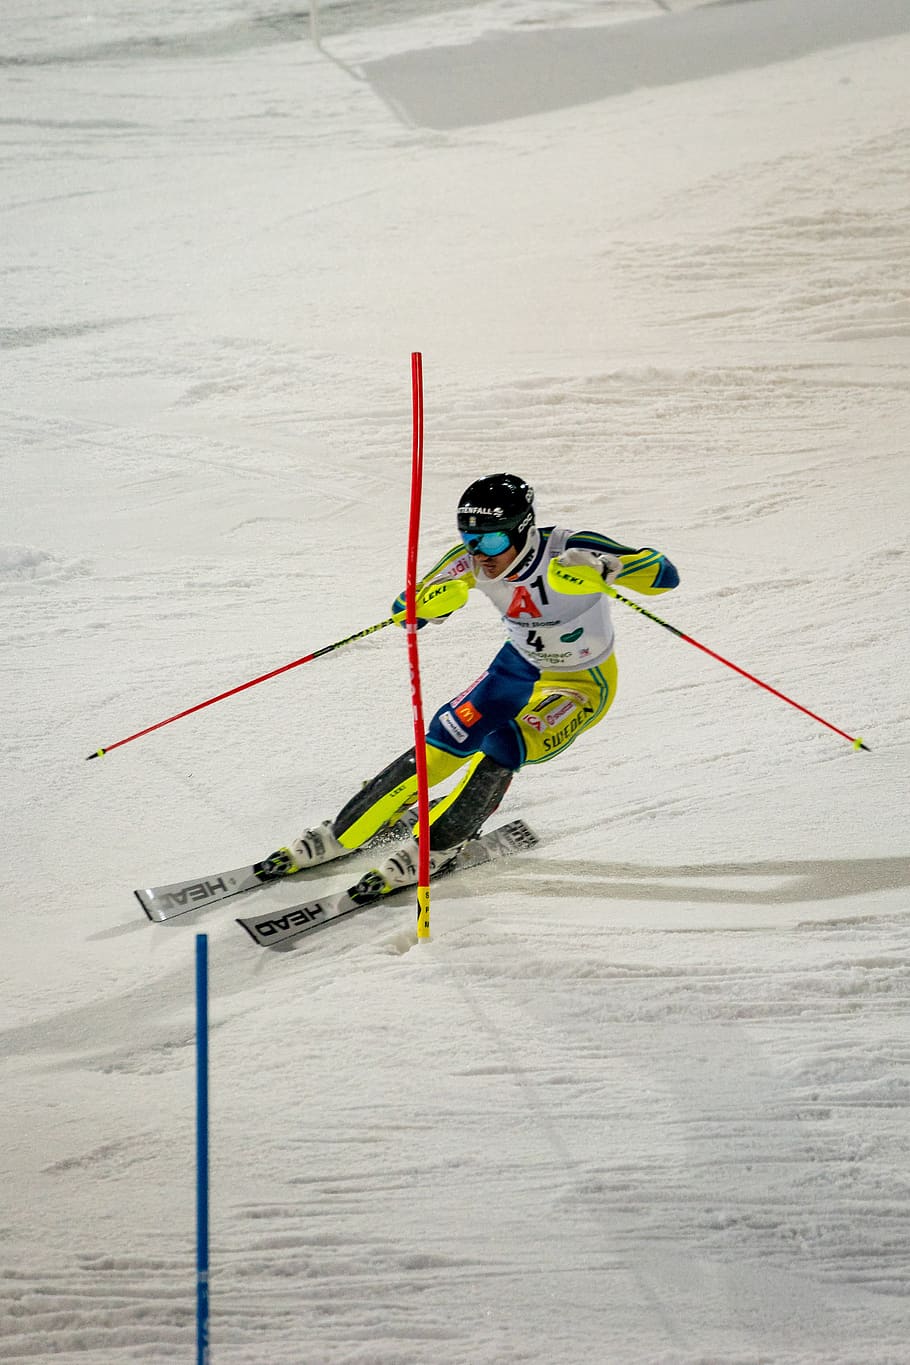 competition, hurry, race, sport, fast, slalom, night race, skiing